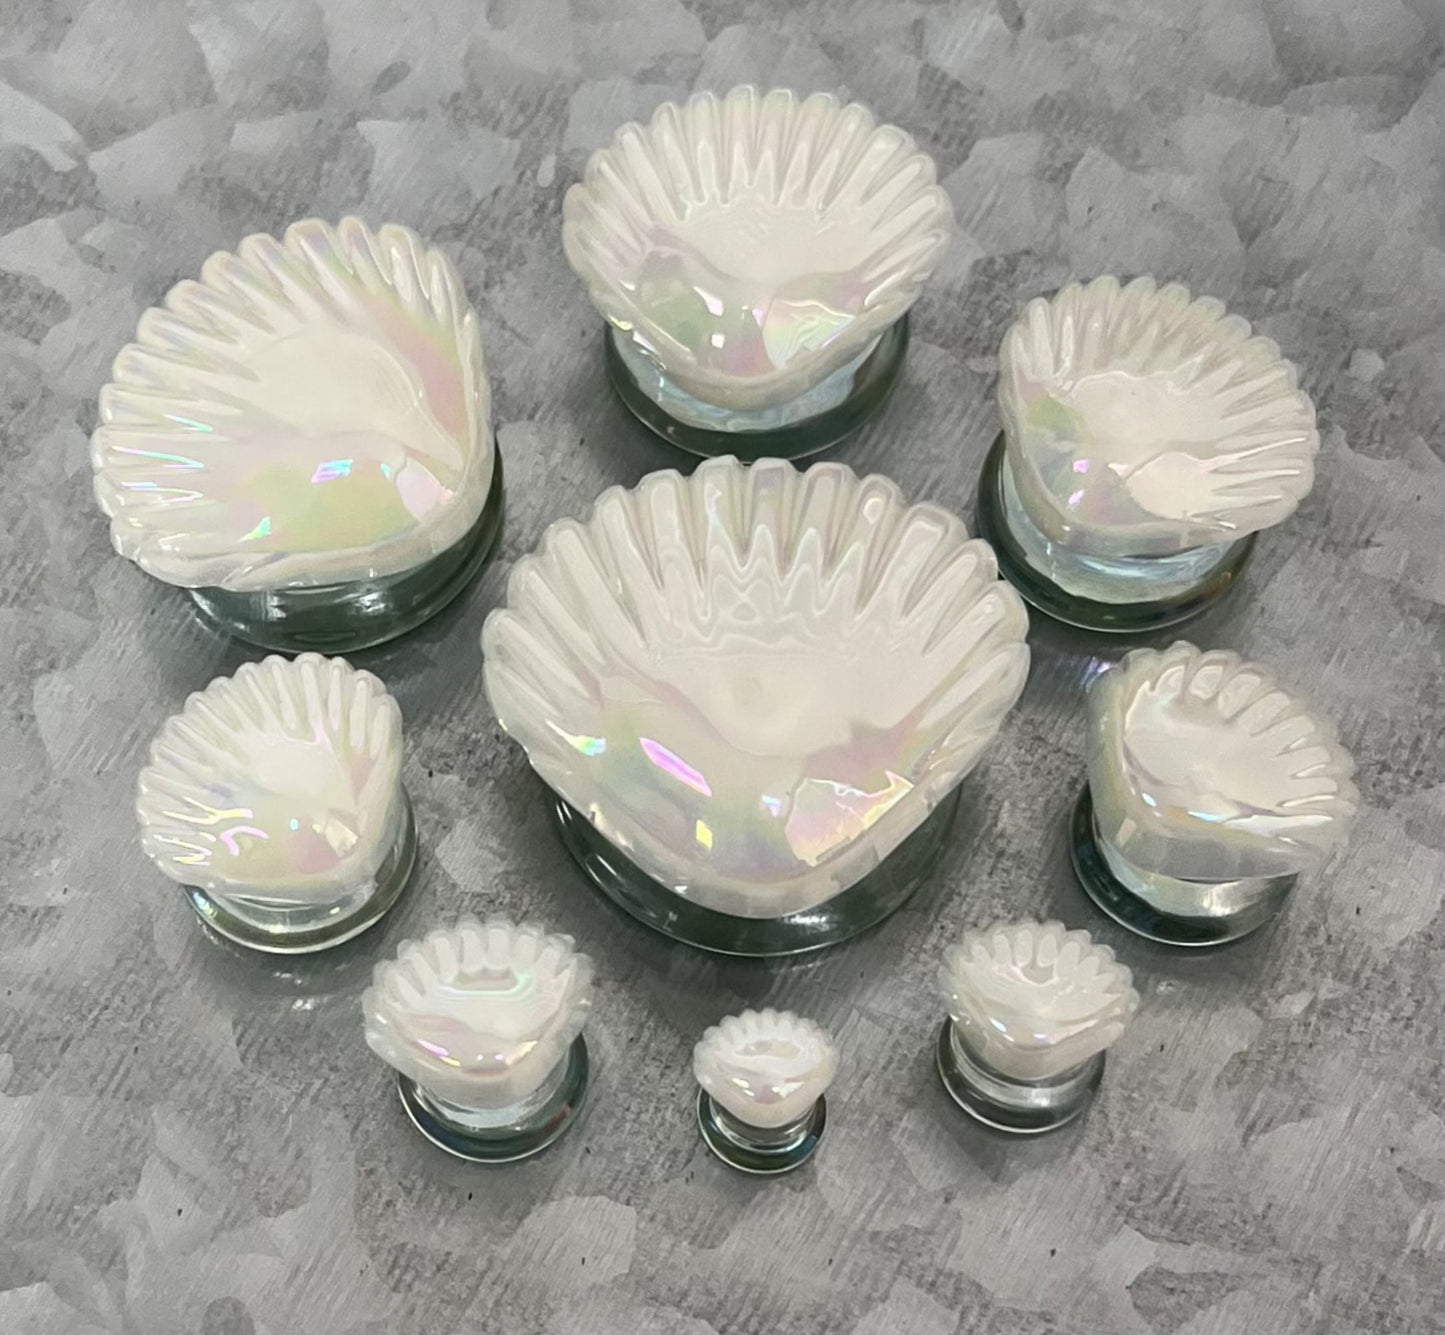 PAIR of Unique White Pearl Seashell Glass Double Flare Tunnels/Plugs - Gauges 2g (6mm) thru 1" (25mm) available!